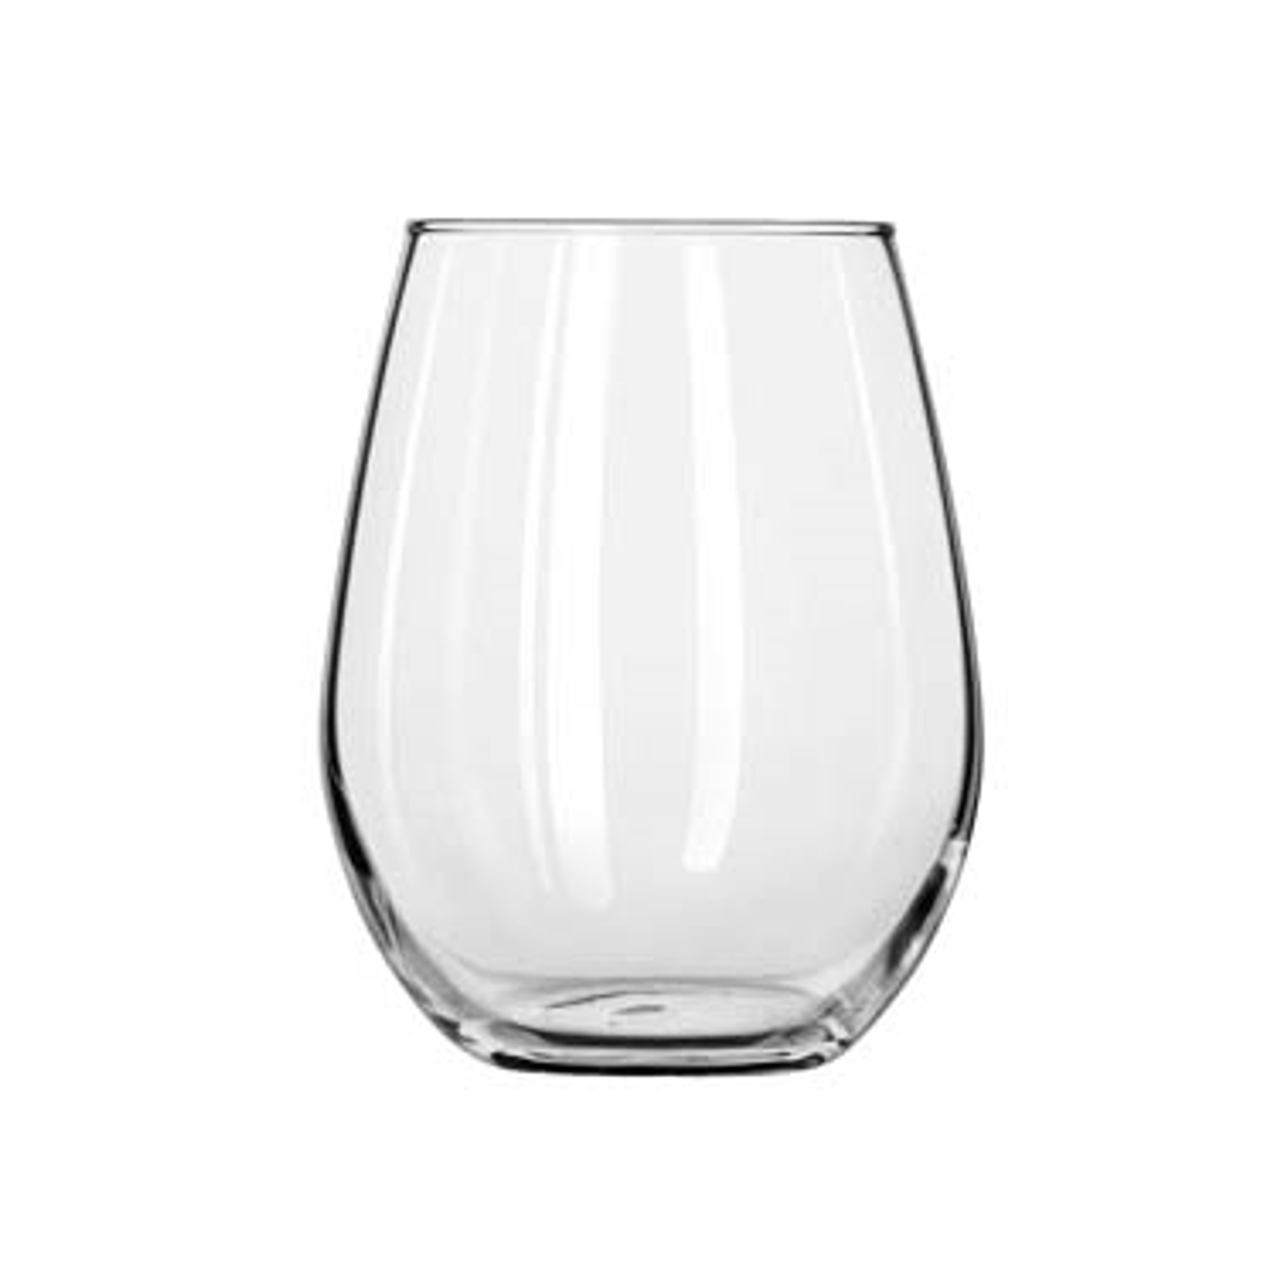 https://cdn11.bigcommerce.com/s-g3i86bef61/images/stencil/1280x1280/products/1468/4035/Libbey-207-Stemless-Wine-Glass__45013.1666898275.png?c=1